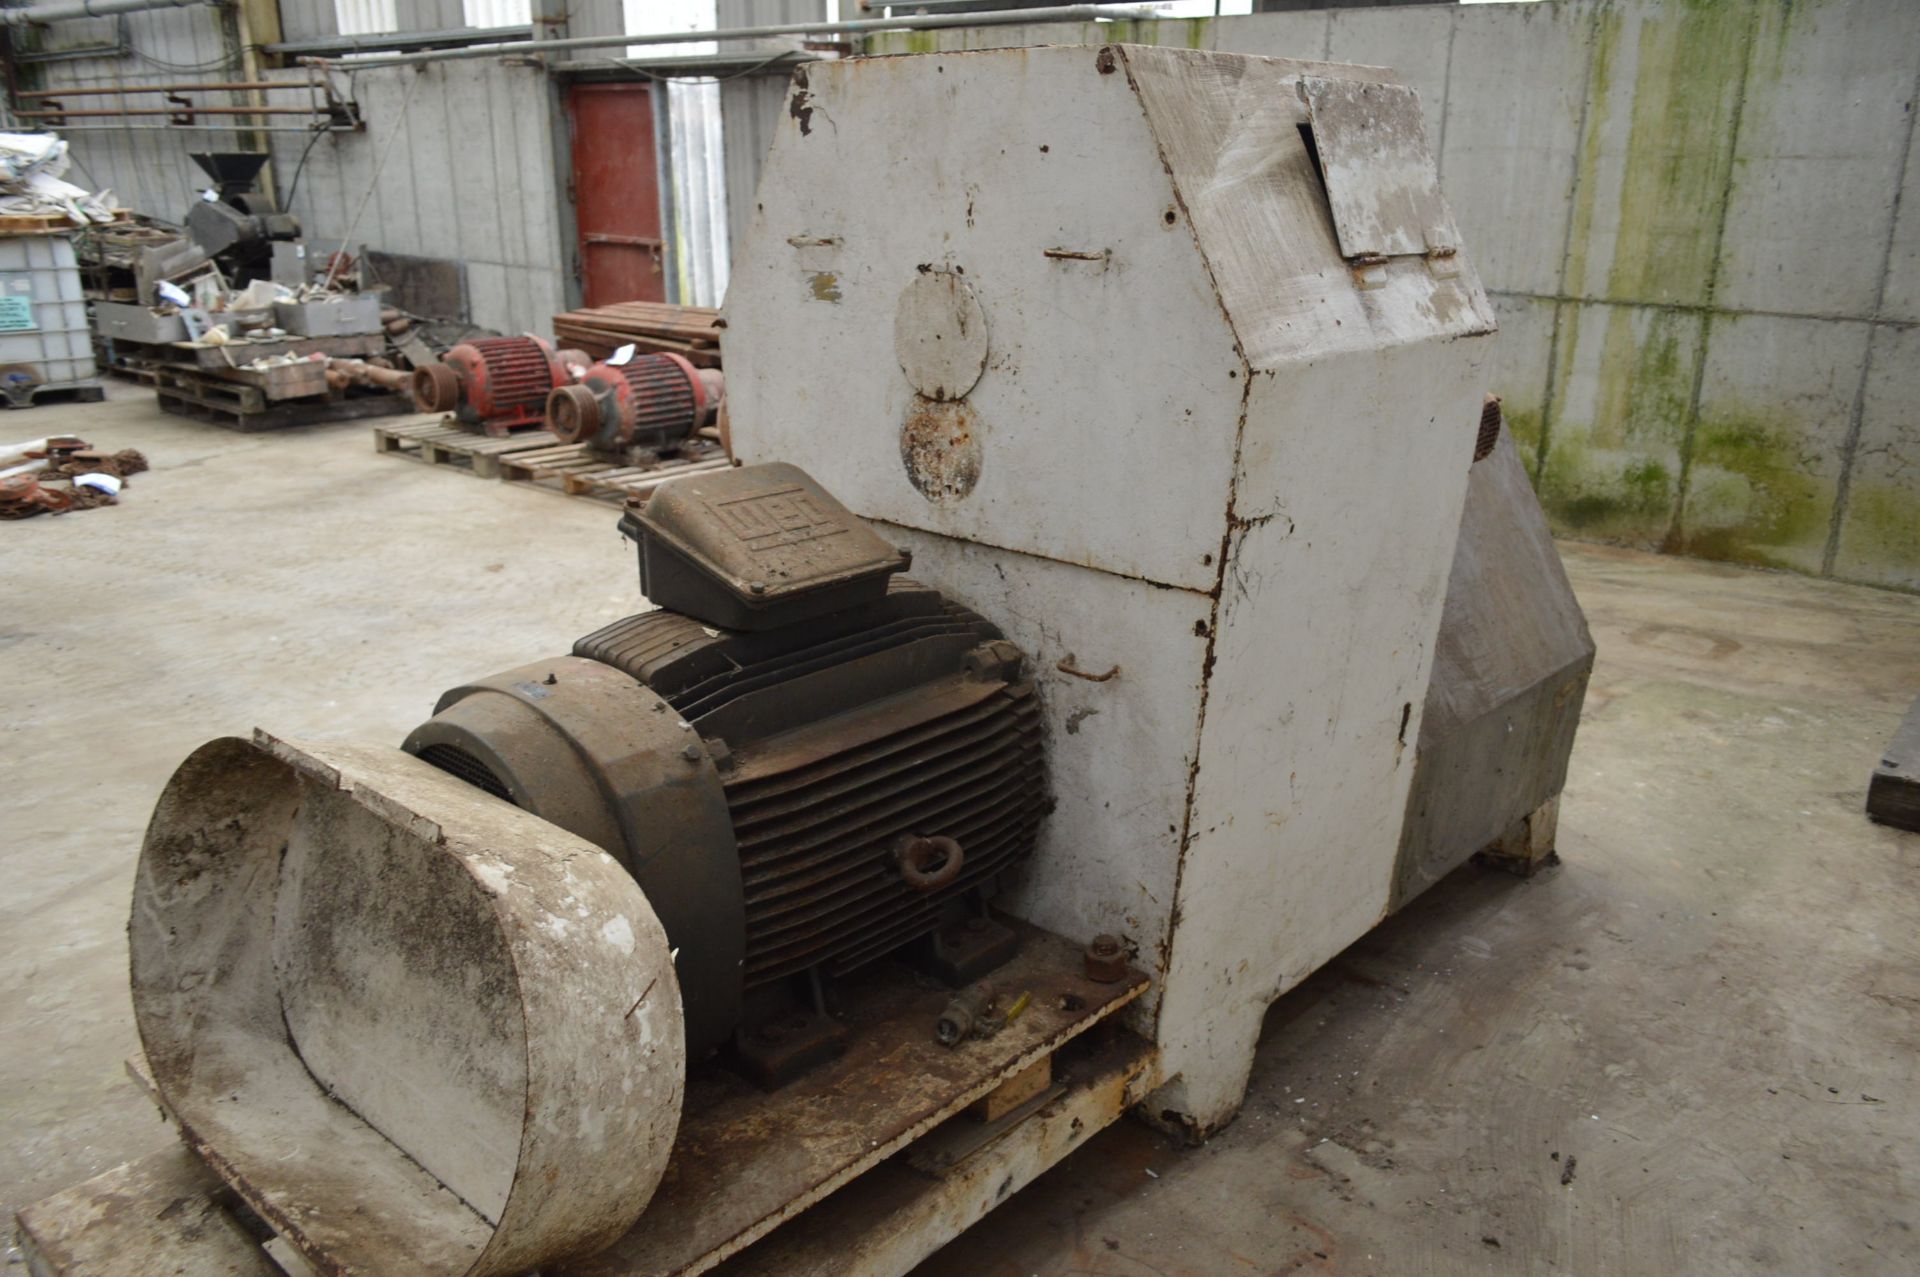 Wenger EXTRUDER, serial no. 8312-8693, with Weg 55kW electric motor and equipment on two pallets - Image 3 of 6